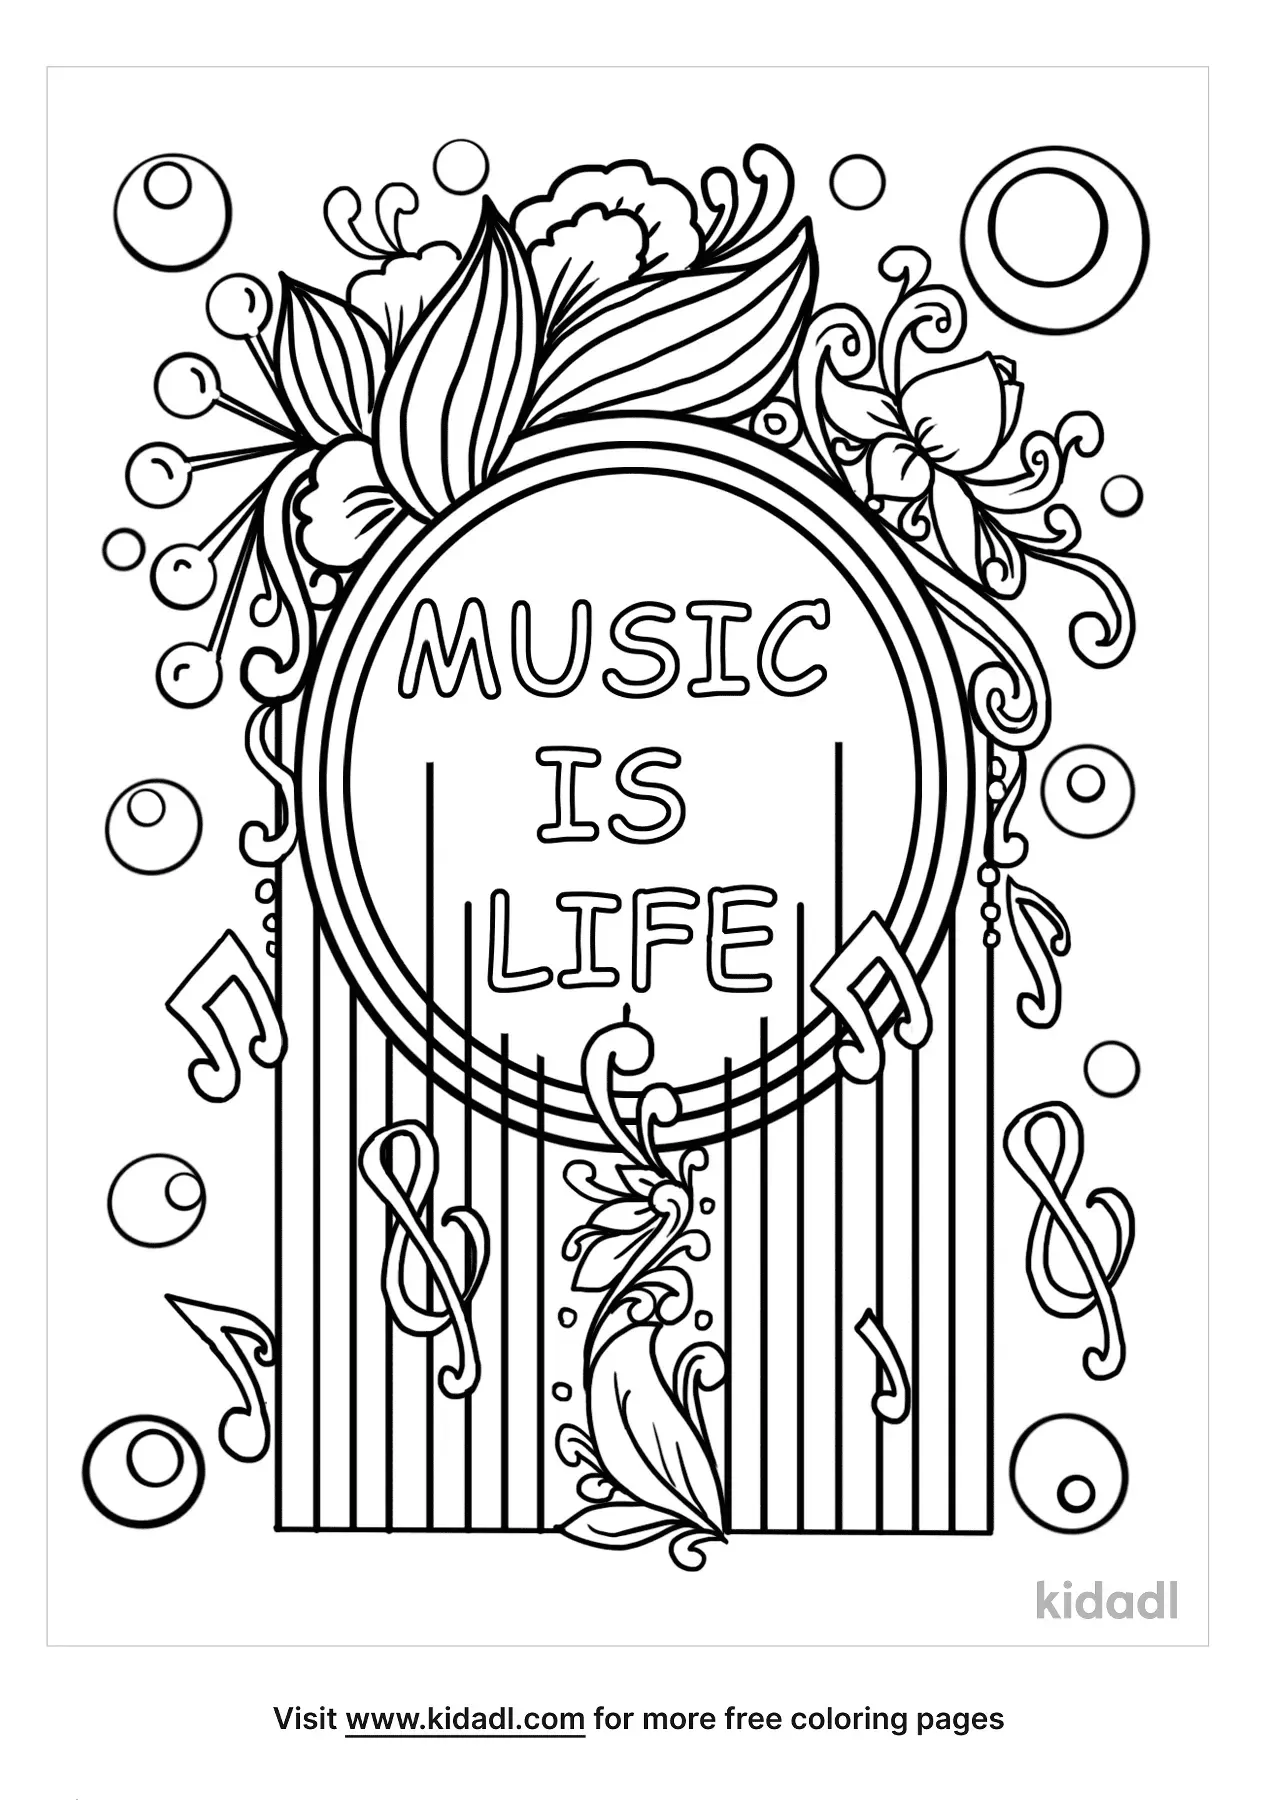 free-for-11-year-olds-coloring-page-coloring-page-printables-kidadl